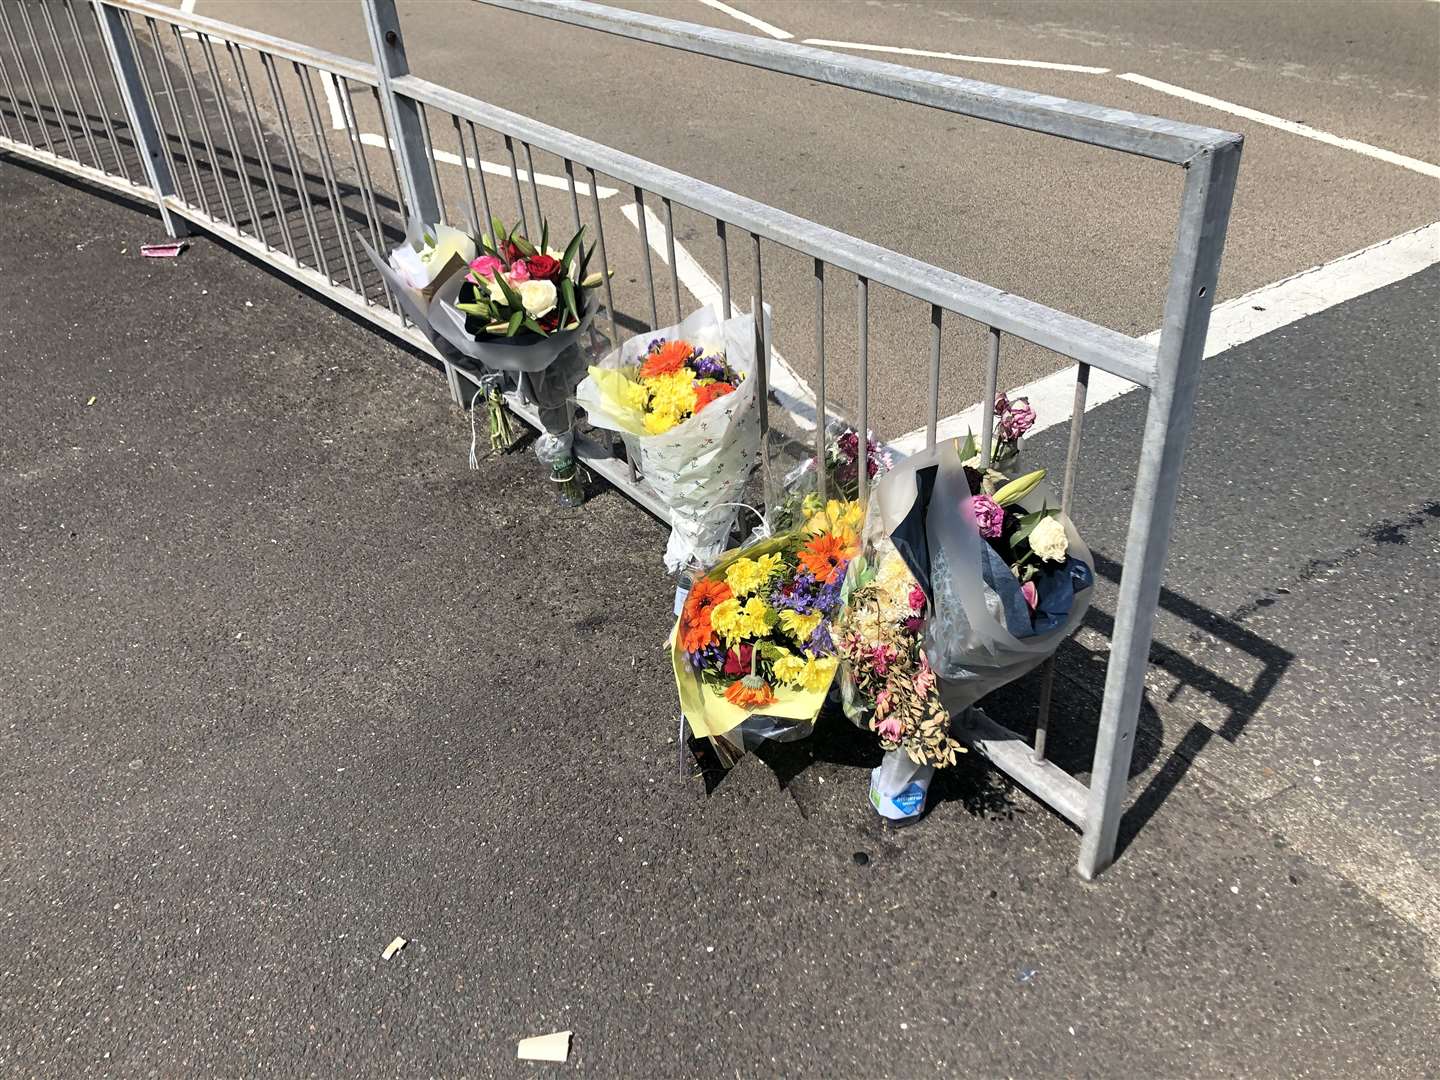 Tributes were left for a man in his 30s from Medway who died near Bowaters Roundabout, Gillingham, last week